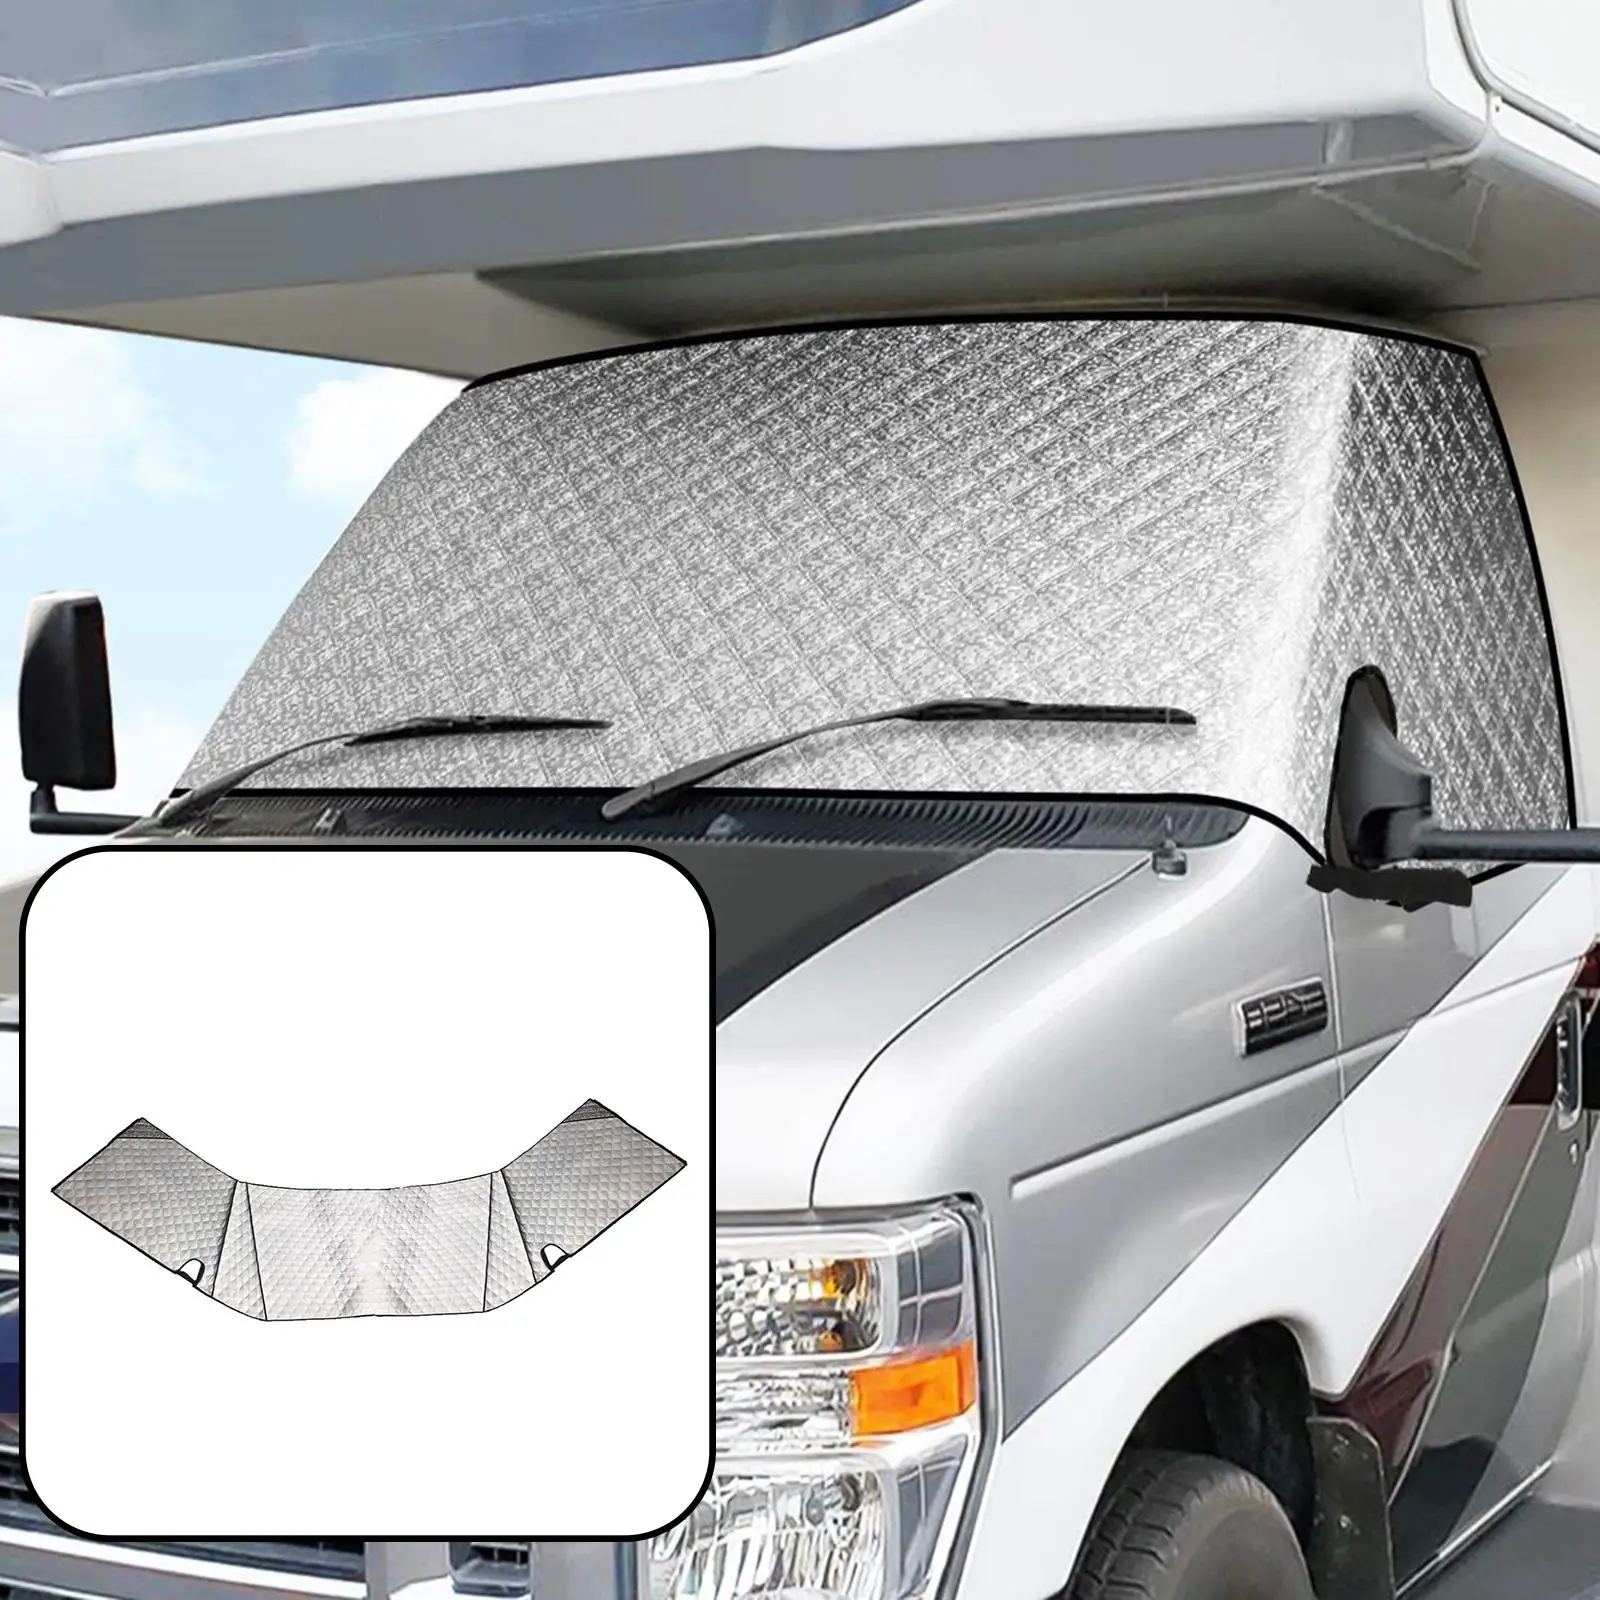 Windshield Sunshade Cover Durable  Protect Accs Visor for RV Motorhome